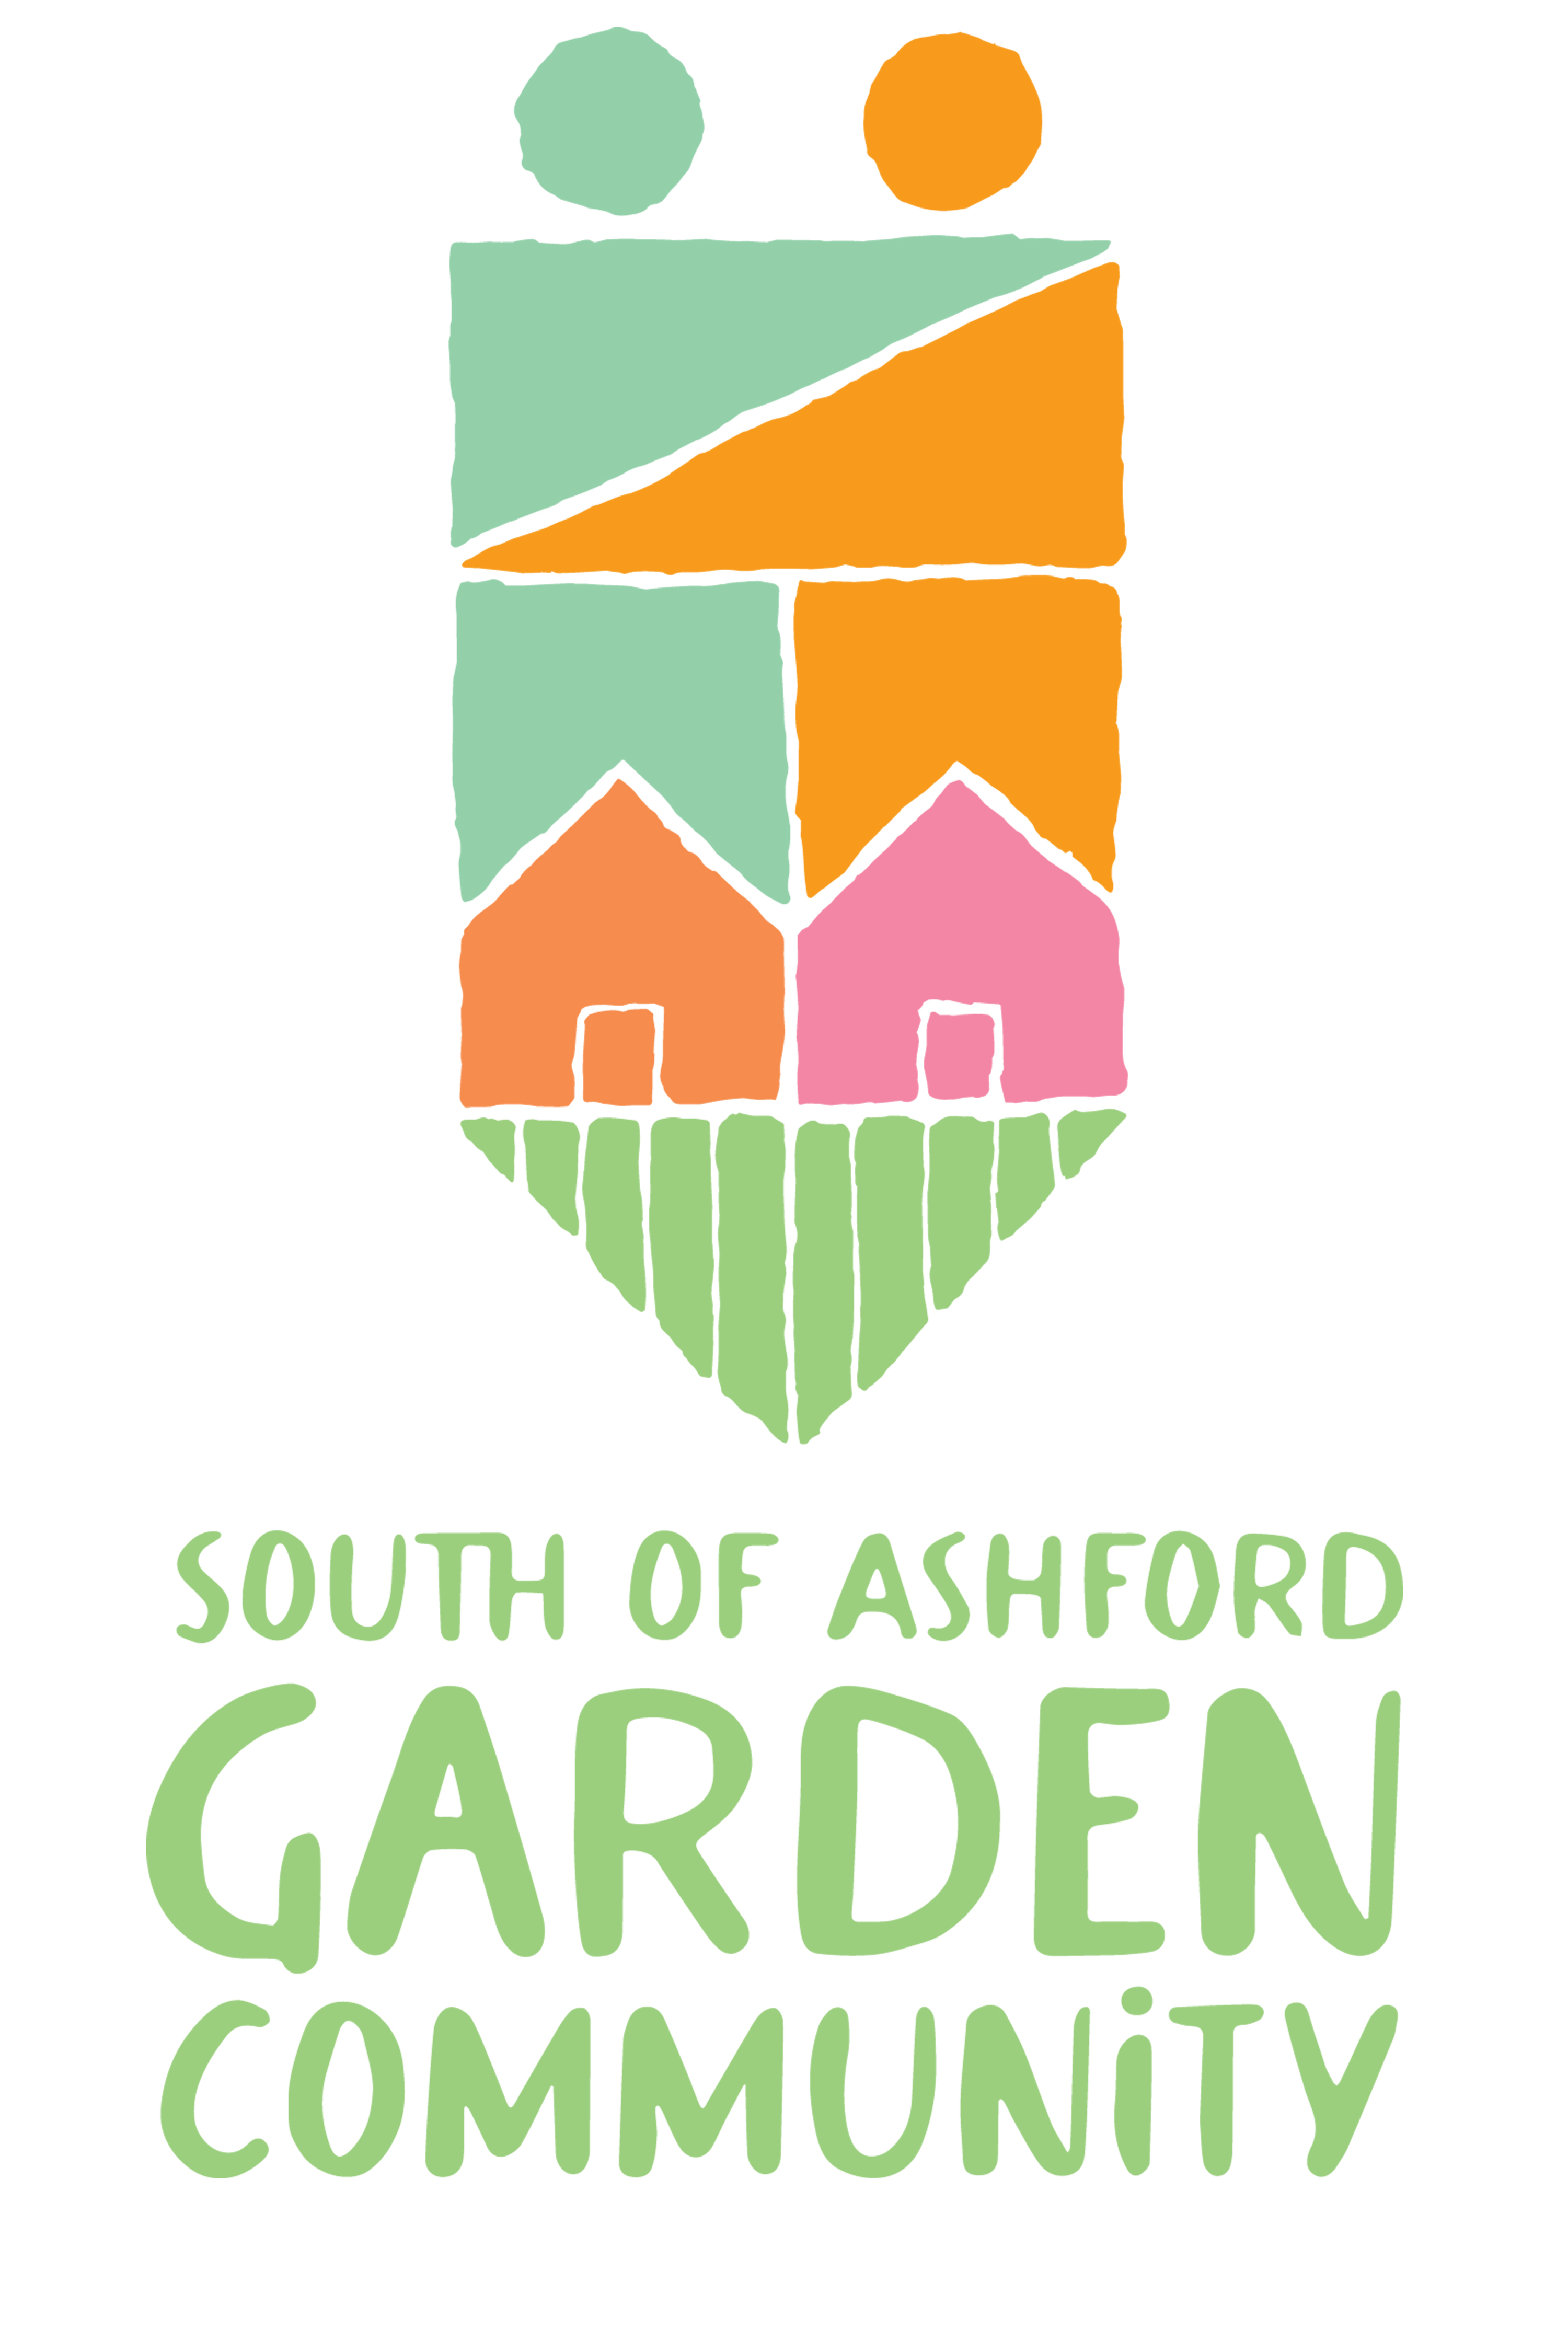 Click to return to the South of Ashford Garden Community website home page